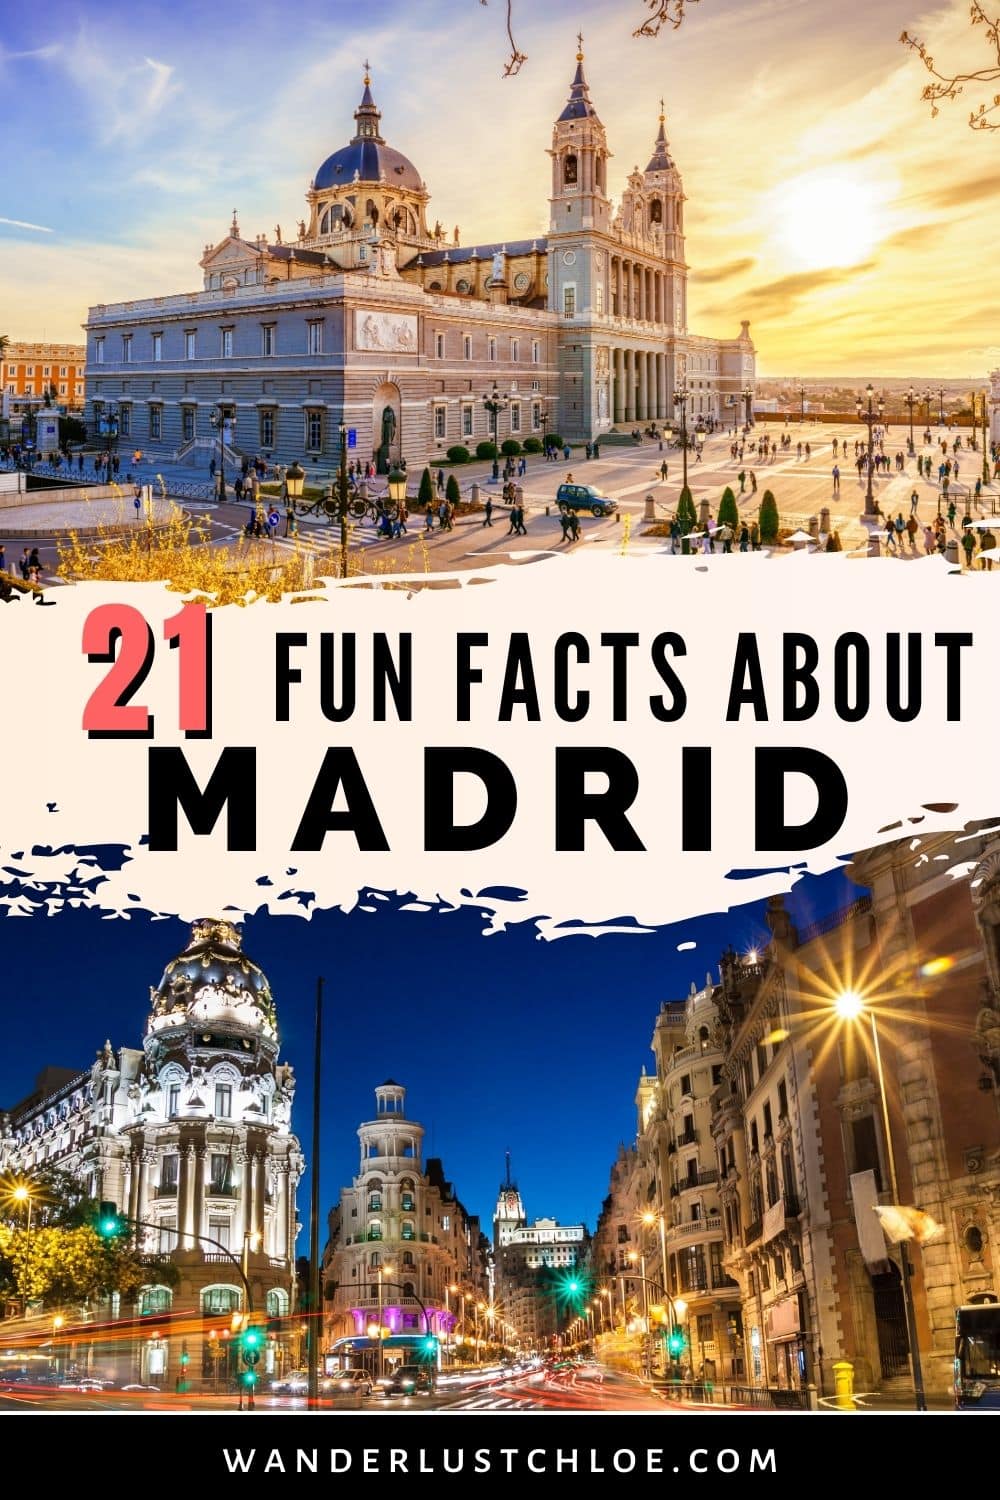 21 Facts about Madrid